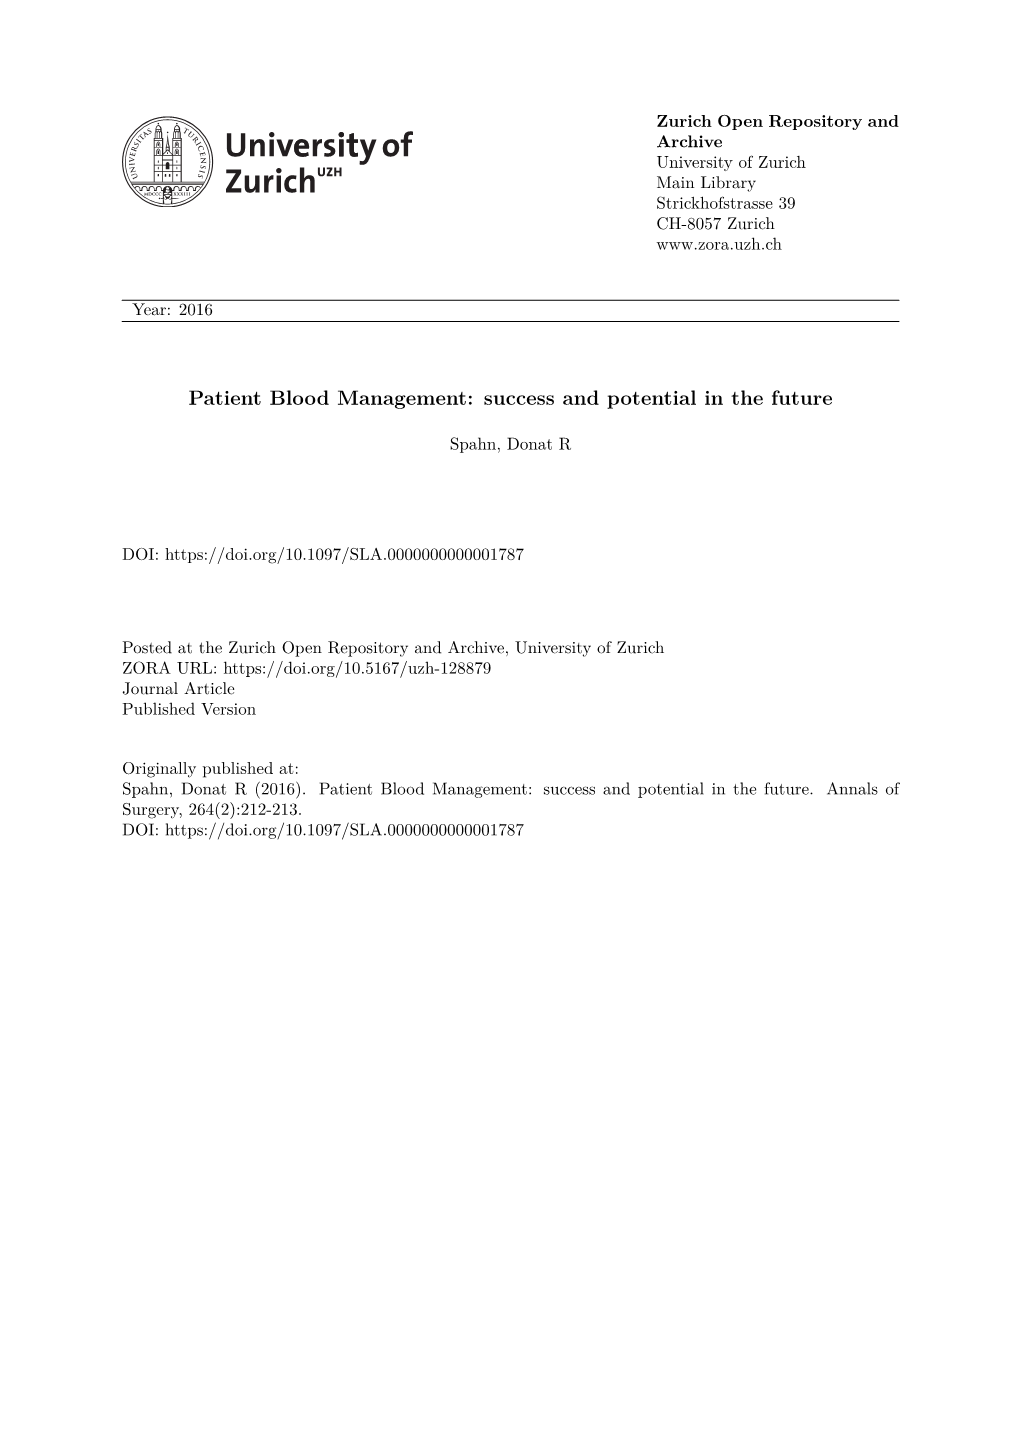 Patient Blood Management: Success and Potential in the Future